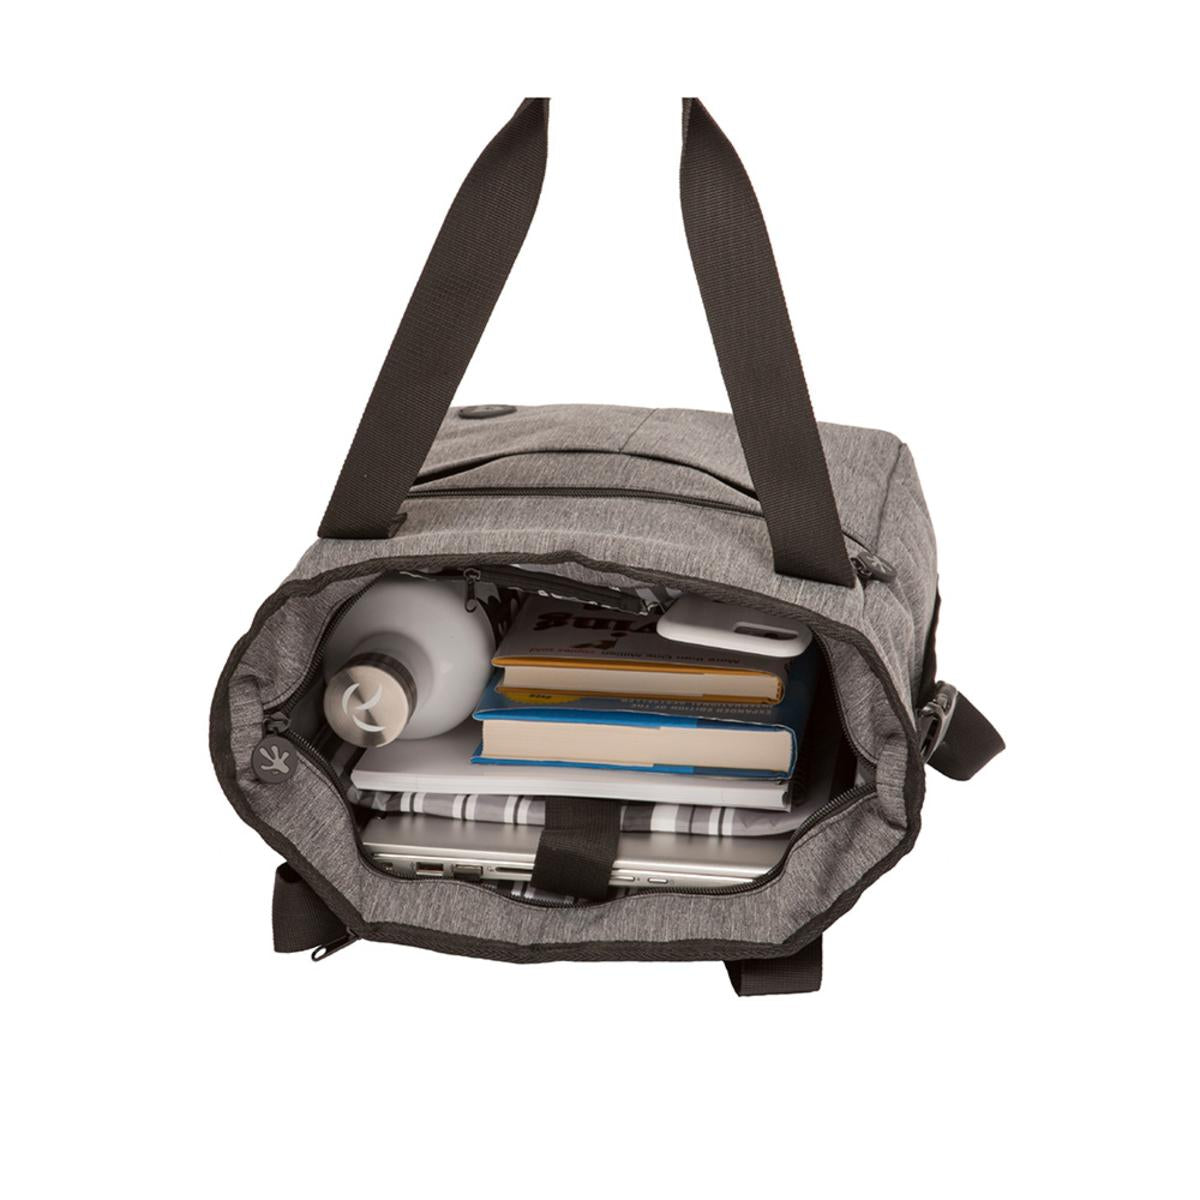 Geckobrands Convertible Tote & Backpack - Everyday Grey